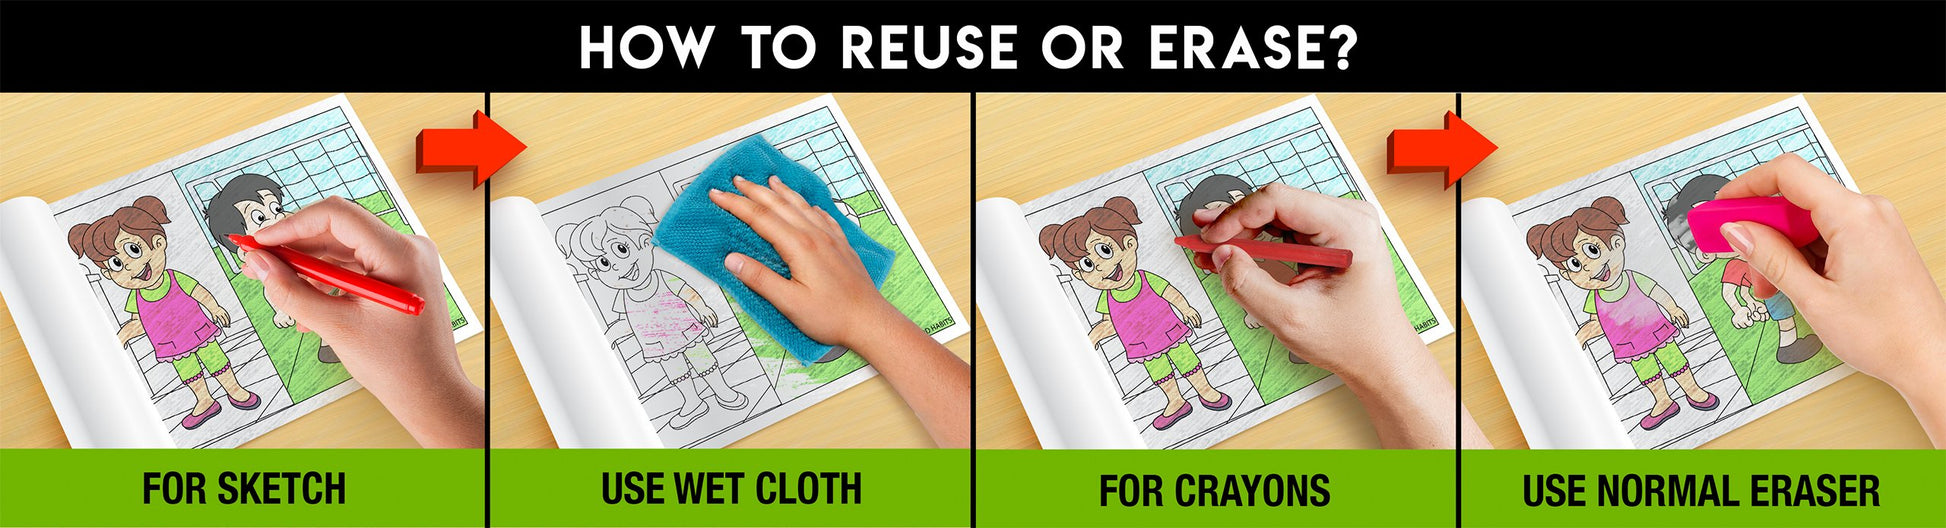 The image has four pictures demonstrating how to reuse or erase: the first picture depicts sketching on the sheet, the second shows using a wet cloth to remove sketches, the third image displays crayons coloring on the good habits sheet, and the fourth image illustrates erasing crayons with a regular eraser.